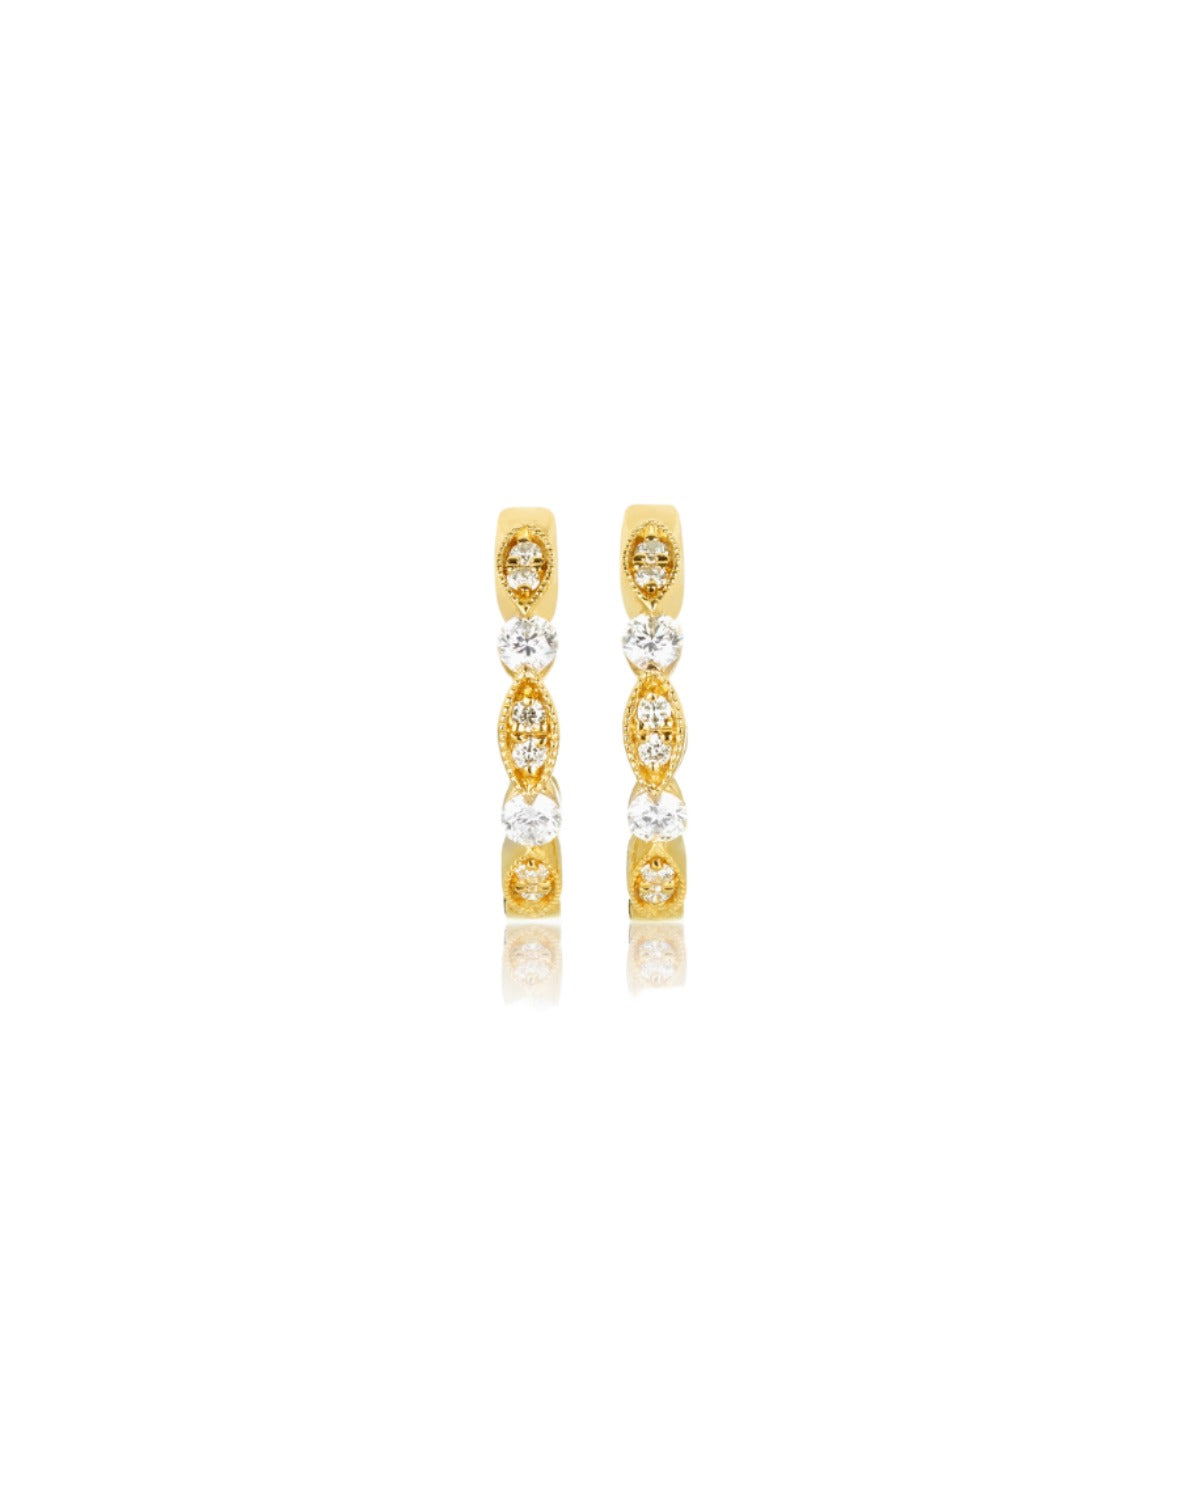 vintage diamond huggies crafted from 18k yellow gold front view by claude and me jewellery